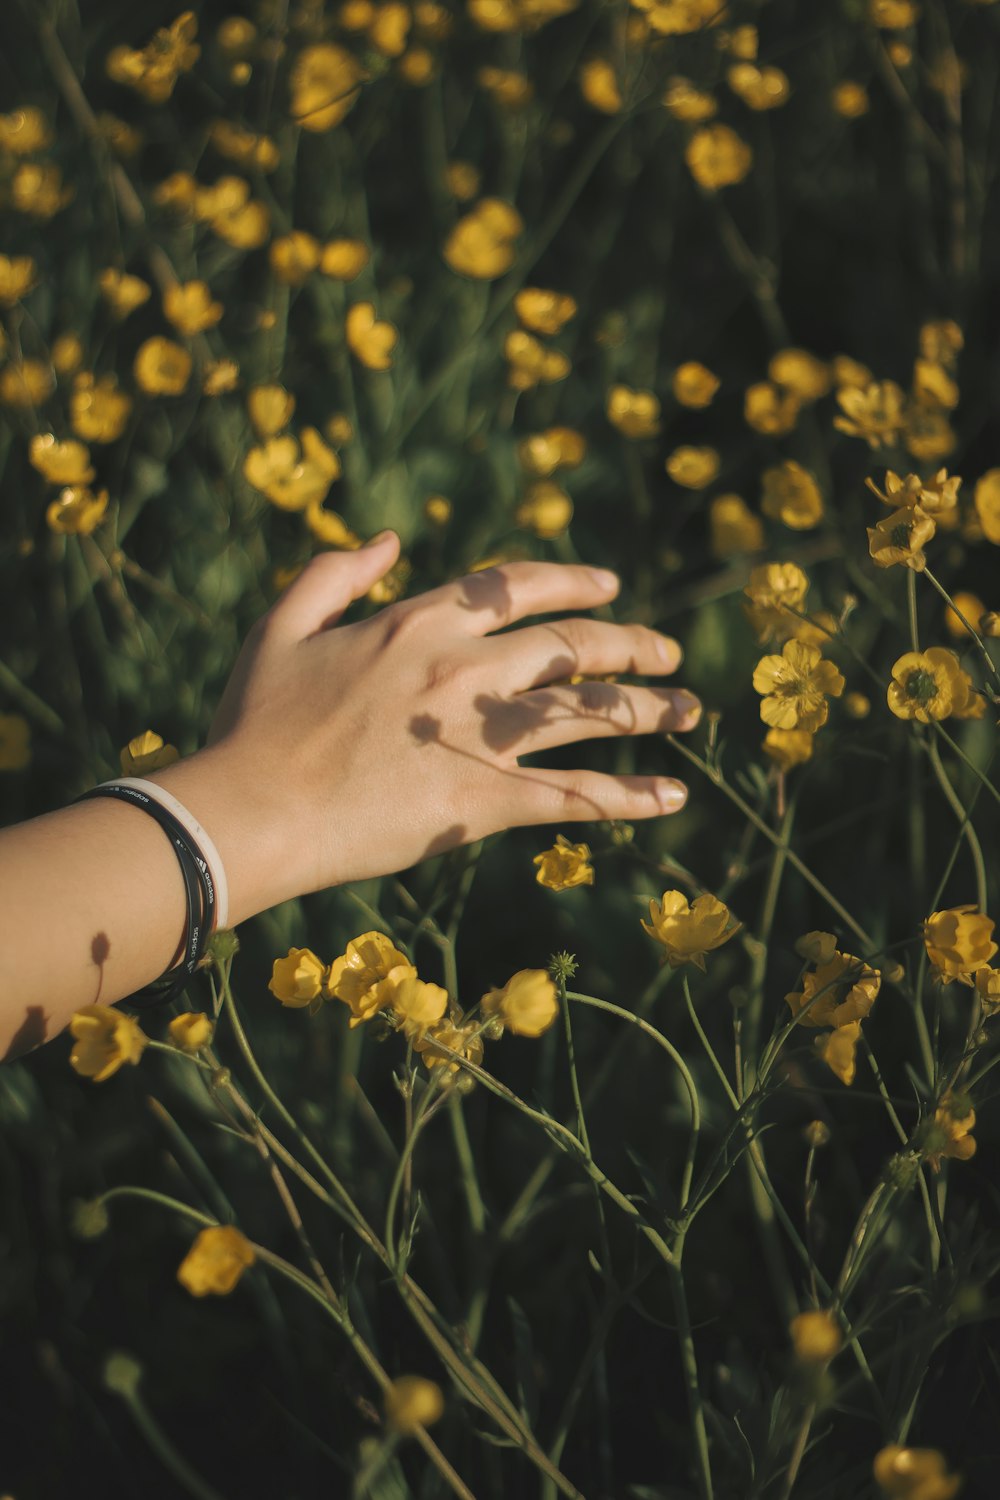 person wearing silver link bracelet watch on yellow flower field during daytime